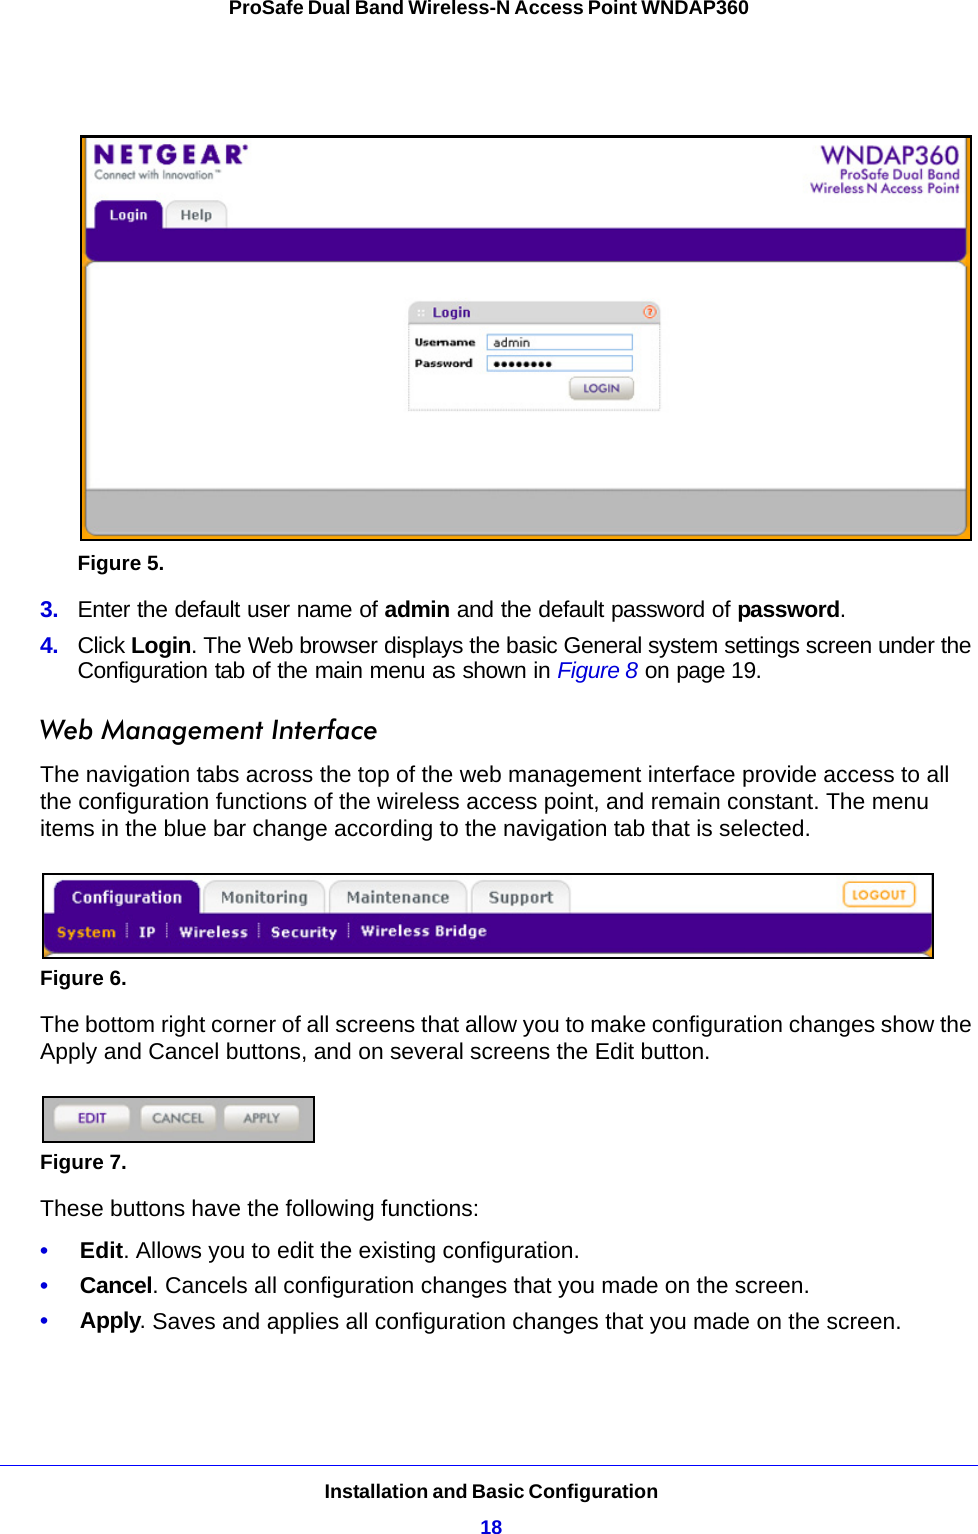 Installation and Basic Configuration18ProSafe Dual Band Wireless-N Access Point WNDAP360 Figure 5.  3.  Enter the default user name of admin and the default password of password.4.  Click Login. The Web browser displays the basic General system settings screen under the Configuration tab of the main menu as shown in Figure 8 on page 19.Web Management InterfaceThe navigation tabs across the top of the web management interface provide access to all the configuration functions of the wireless access point, and remain constant. The menu items in the blue bar change according to the navigation tab that is selected.Figure 6. The bottom right corner of all screens that allow you to make configuration changes show the Apply and Cancel buttons, and on several screens the Edit button.Figure 7. These buttons have the following functions:•     Edit. Allows you to edit the existing configuration.•     Cancel. Cancels all configuration changes that you made on the screen.•     Apply. Saves and applies all configuration changes that you made on the screen.